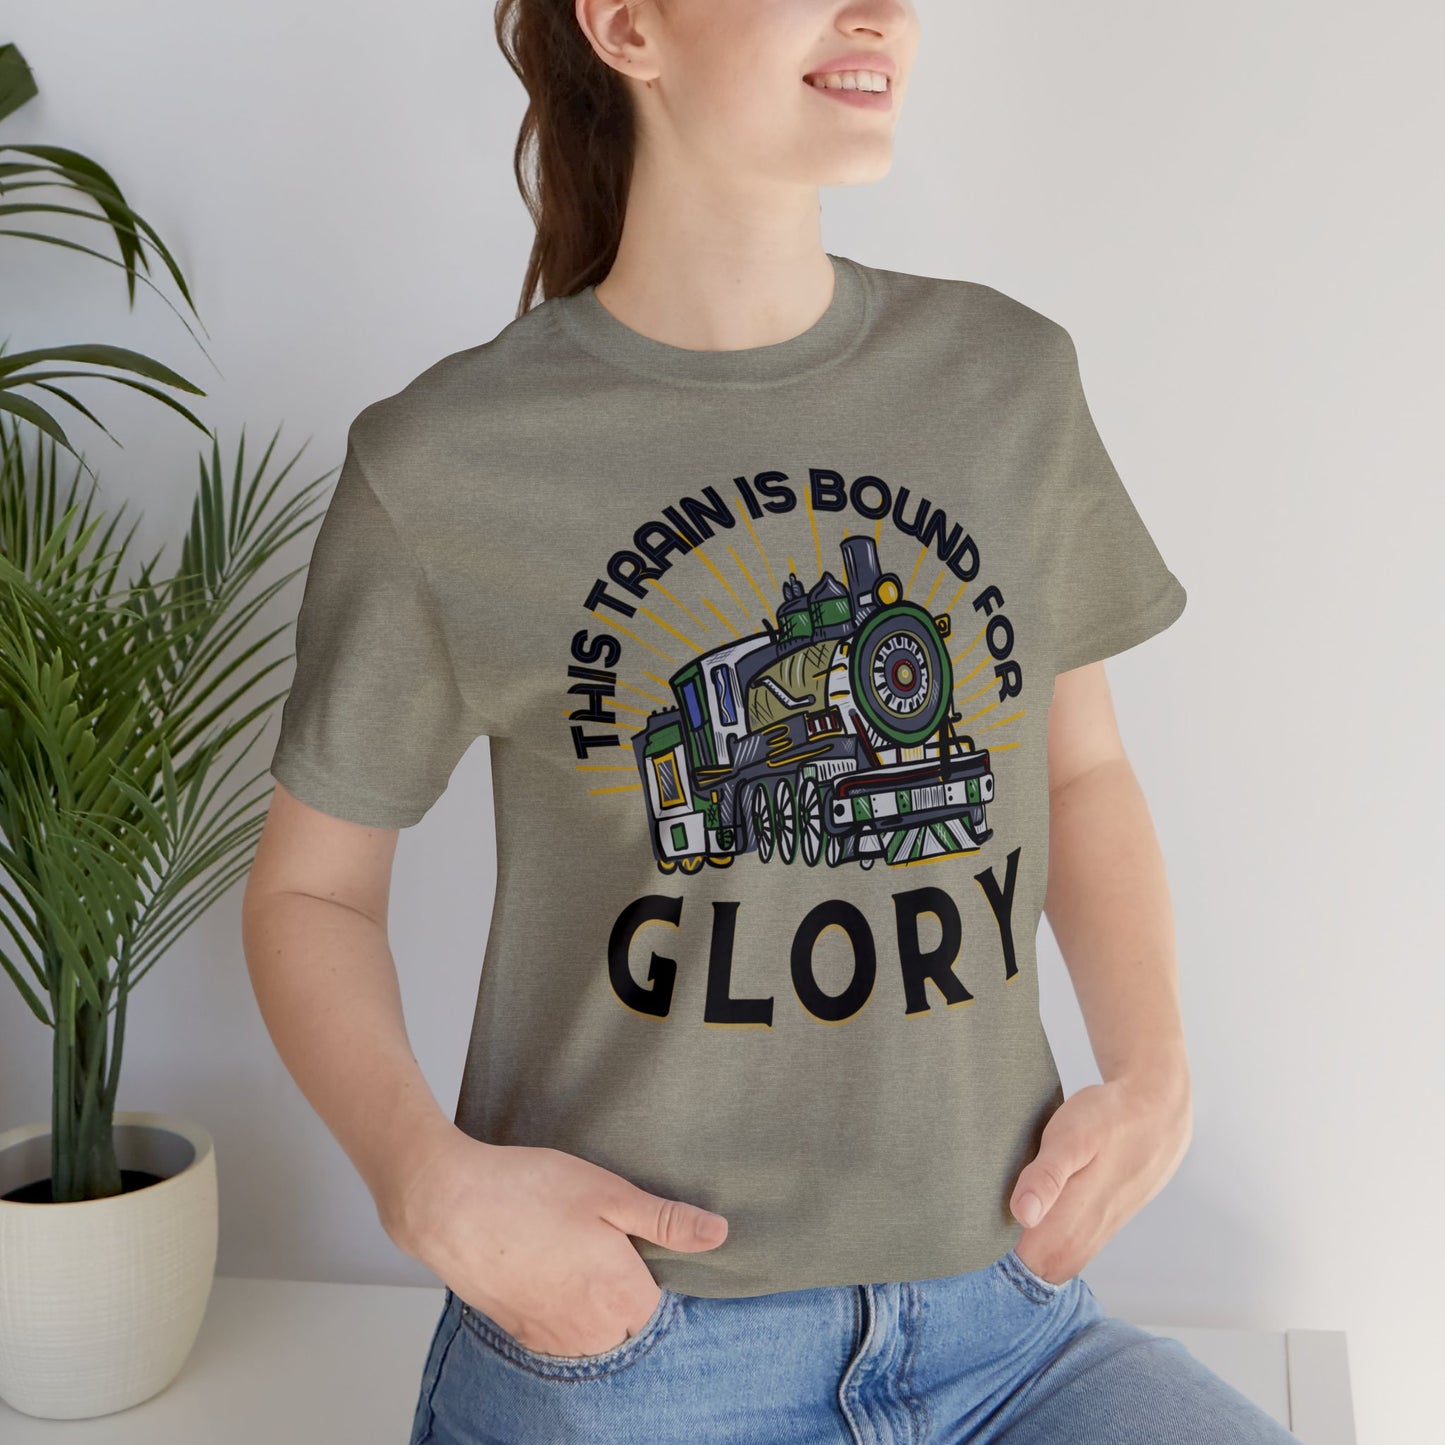 This Train is Bound For Glory (Green Pastures Apparel)